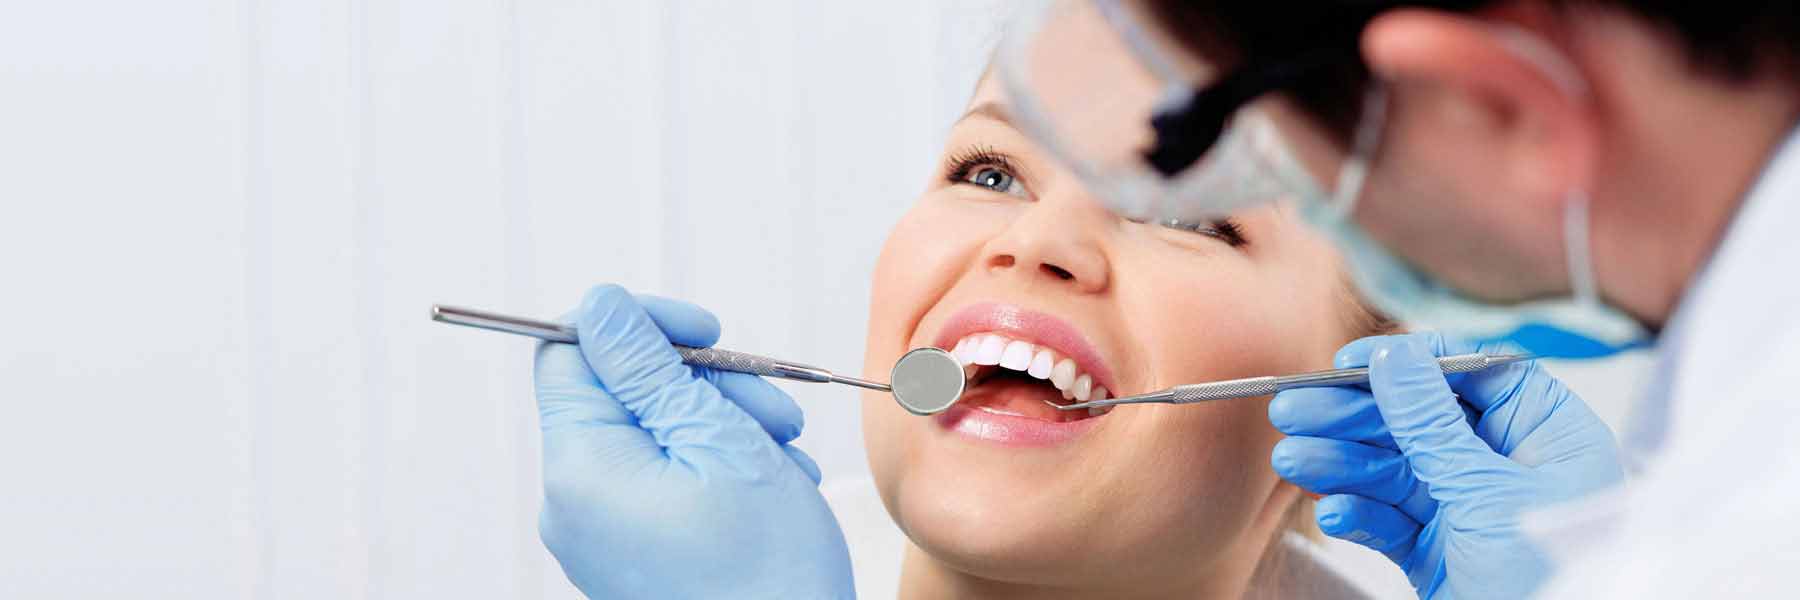 Dental Service in South Maitland - Tooth N Care